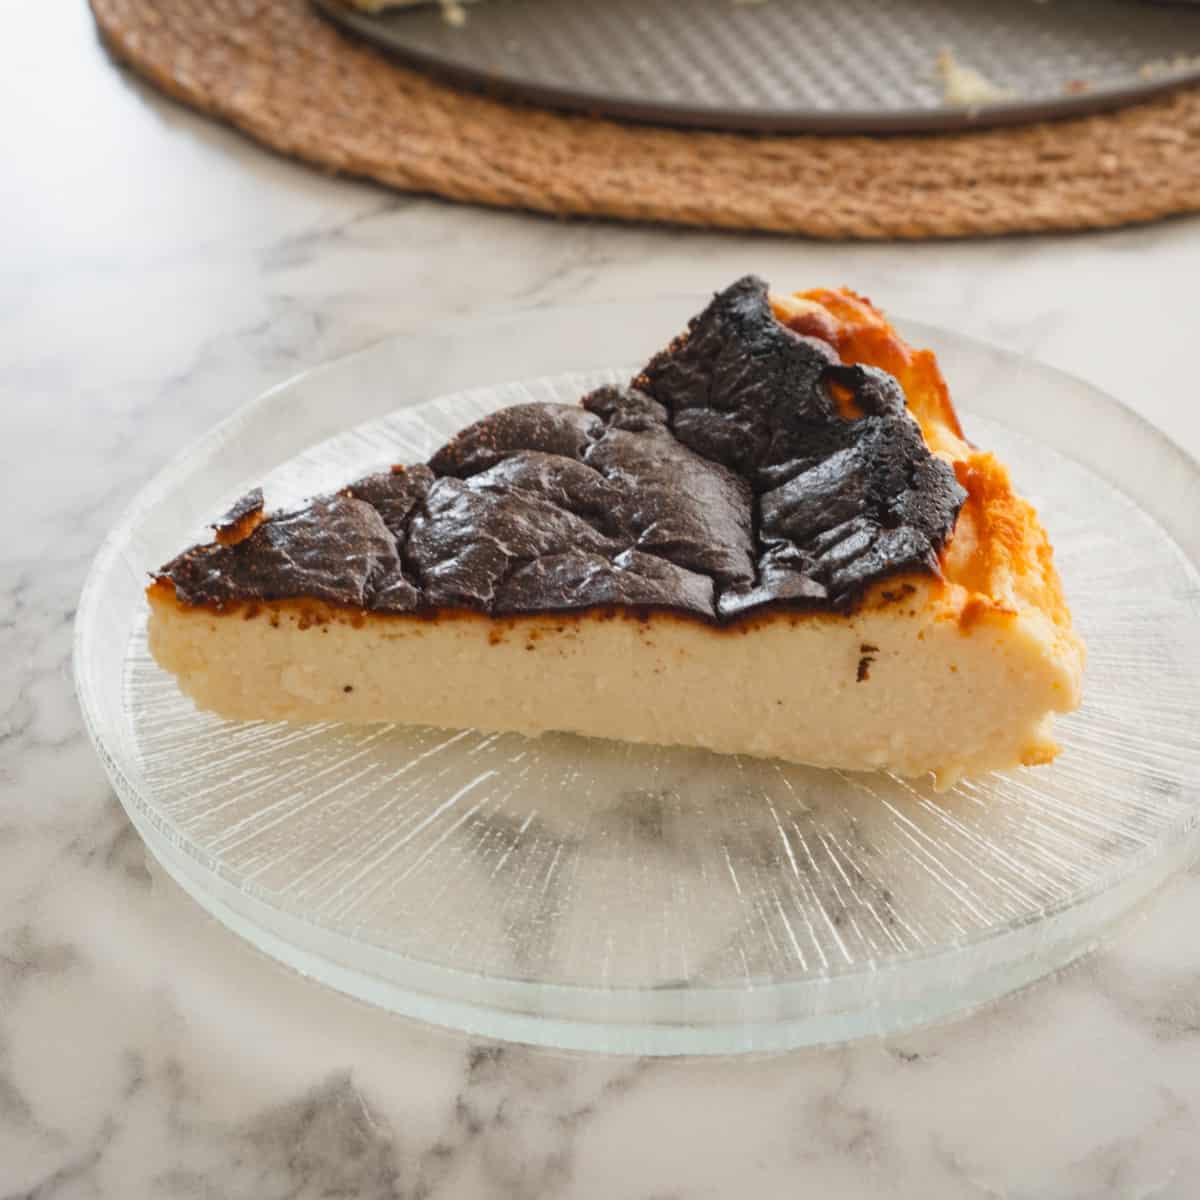 A slice of sugar-free keto Basque cheesecake served on a glass plate.